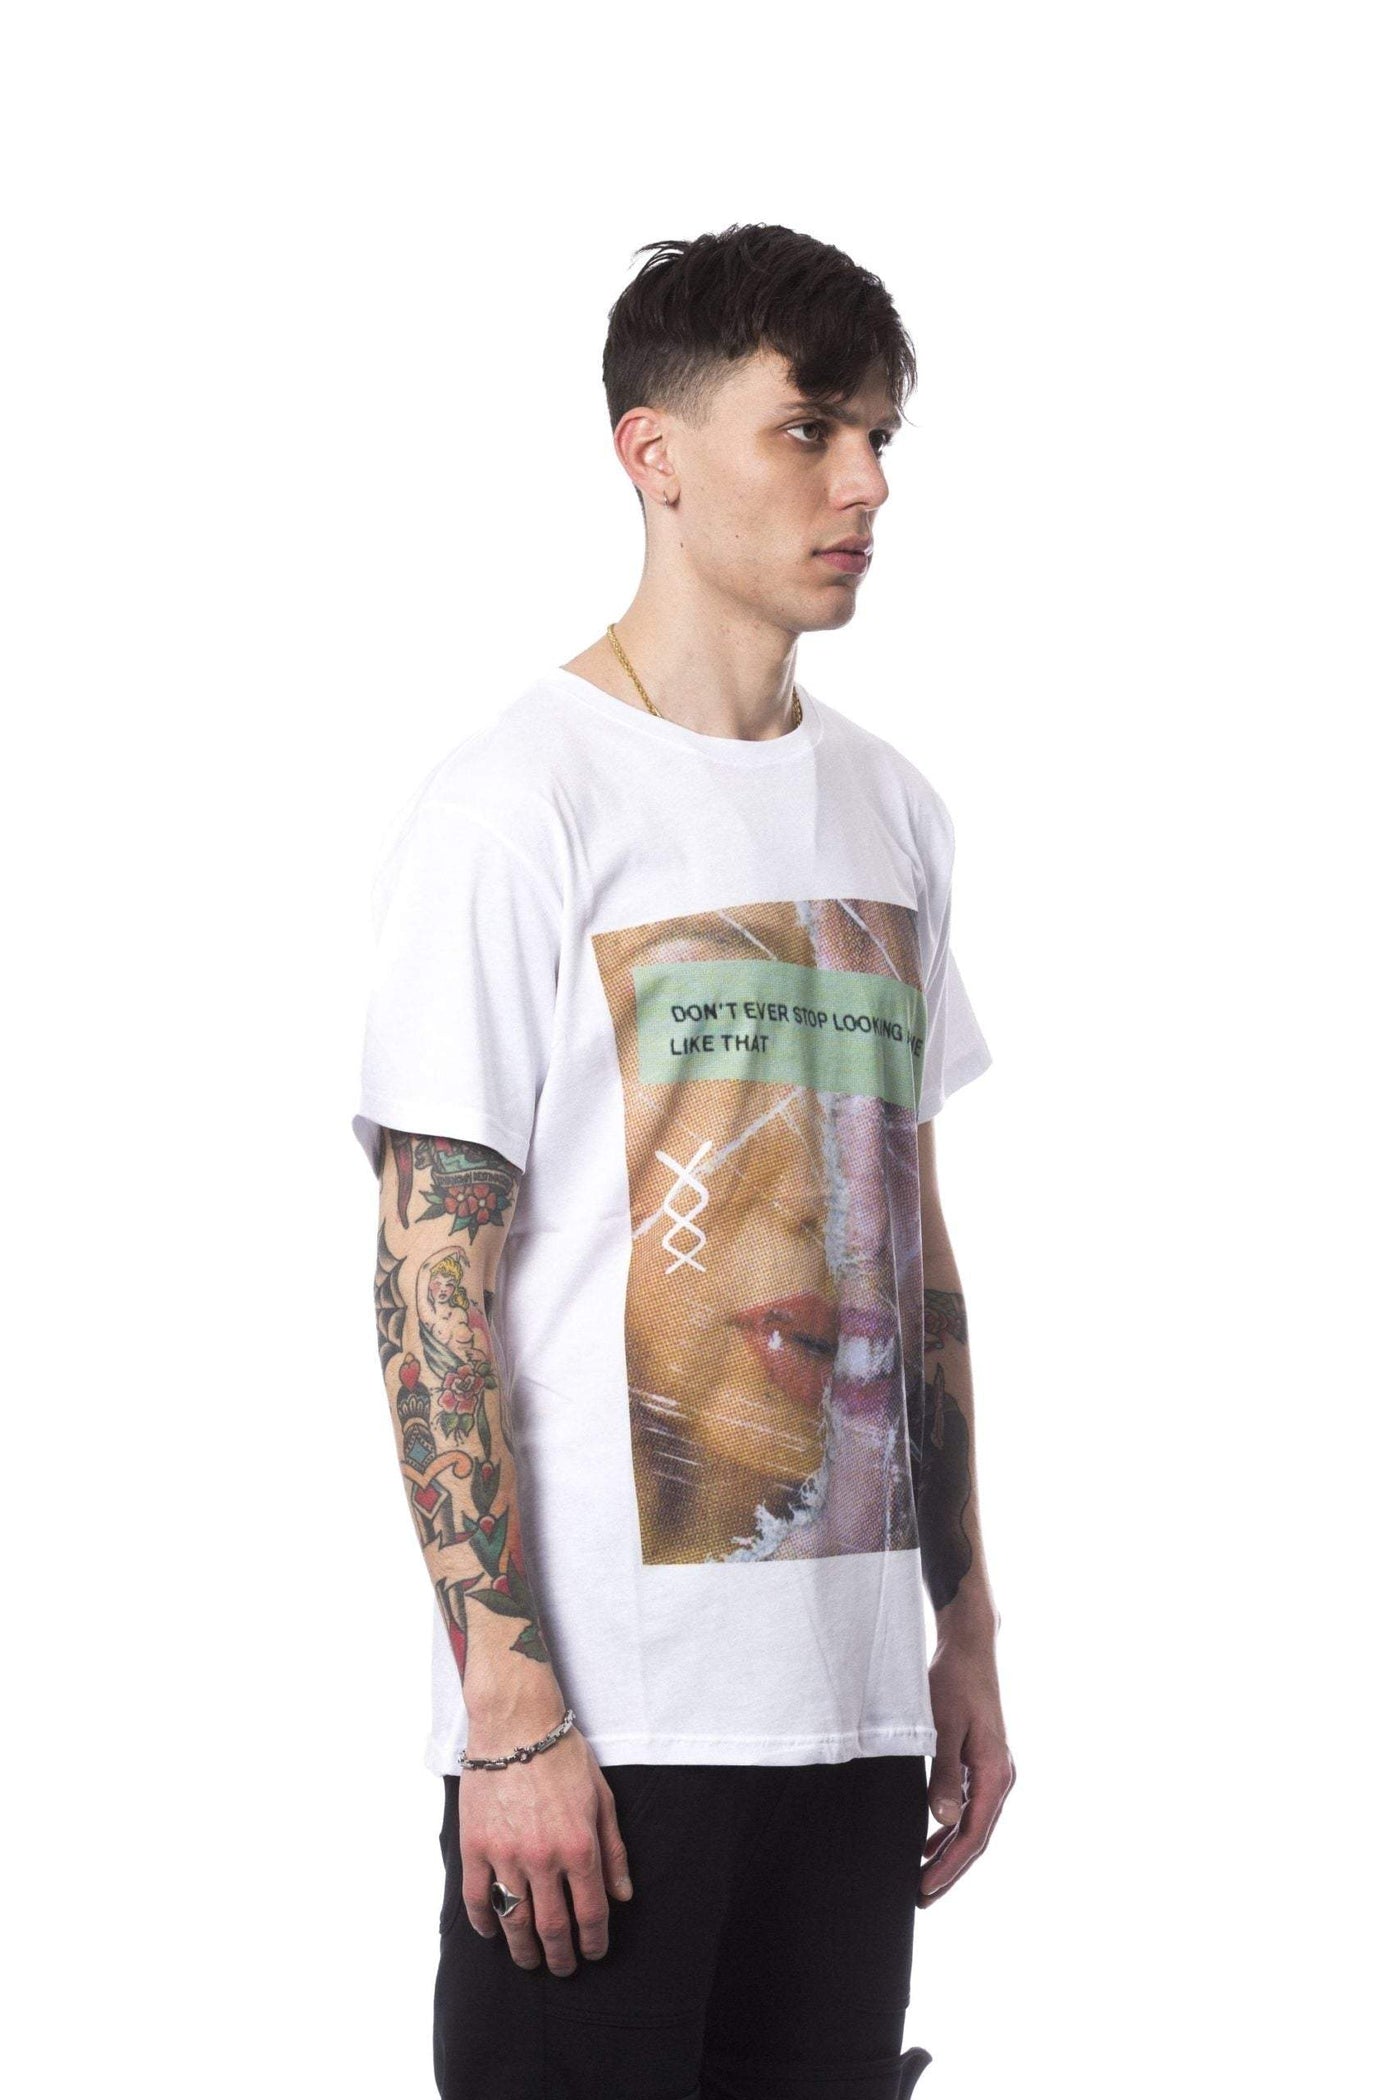 Nicolo Tonetto round neck printed T-shirt #men, feed-color-White, feed-gender-adult, feed-gender-male, M, Nicolo Tonetto, S, T-shirts - Men - Clothing, White at SEYMAYKA